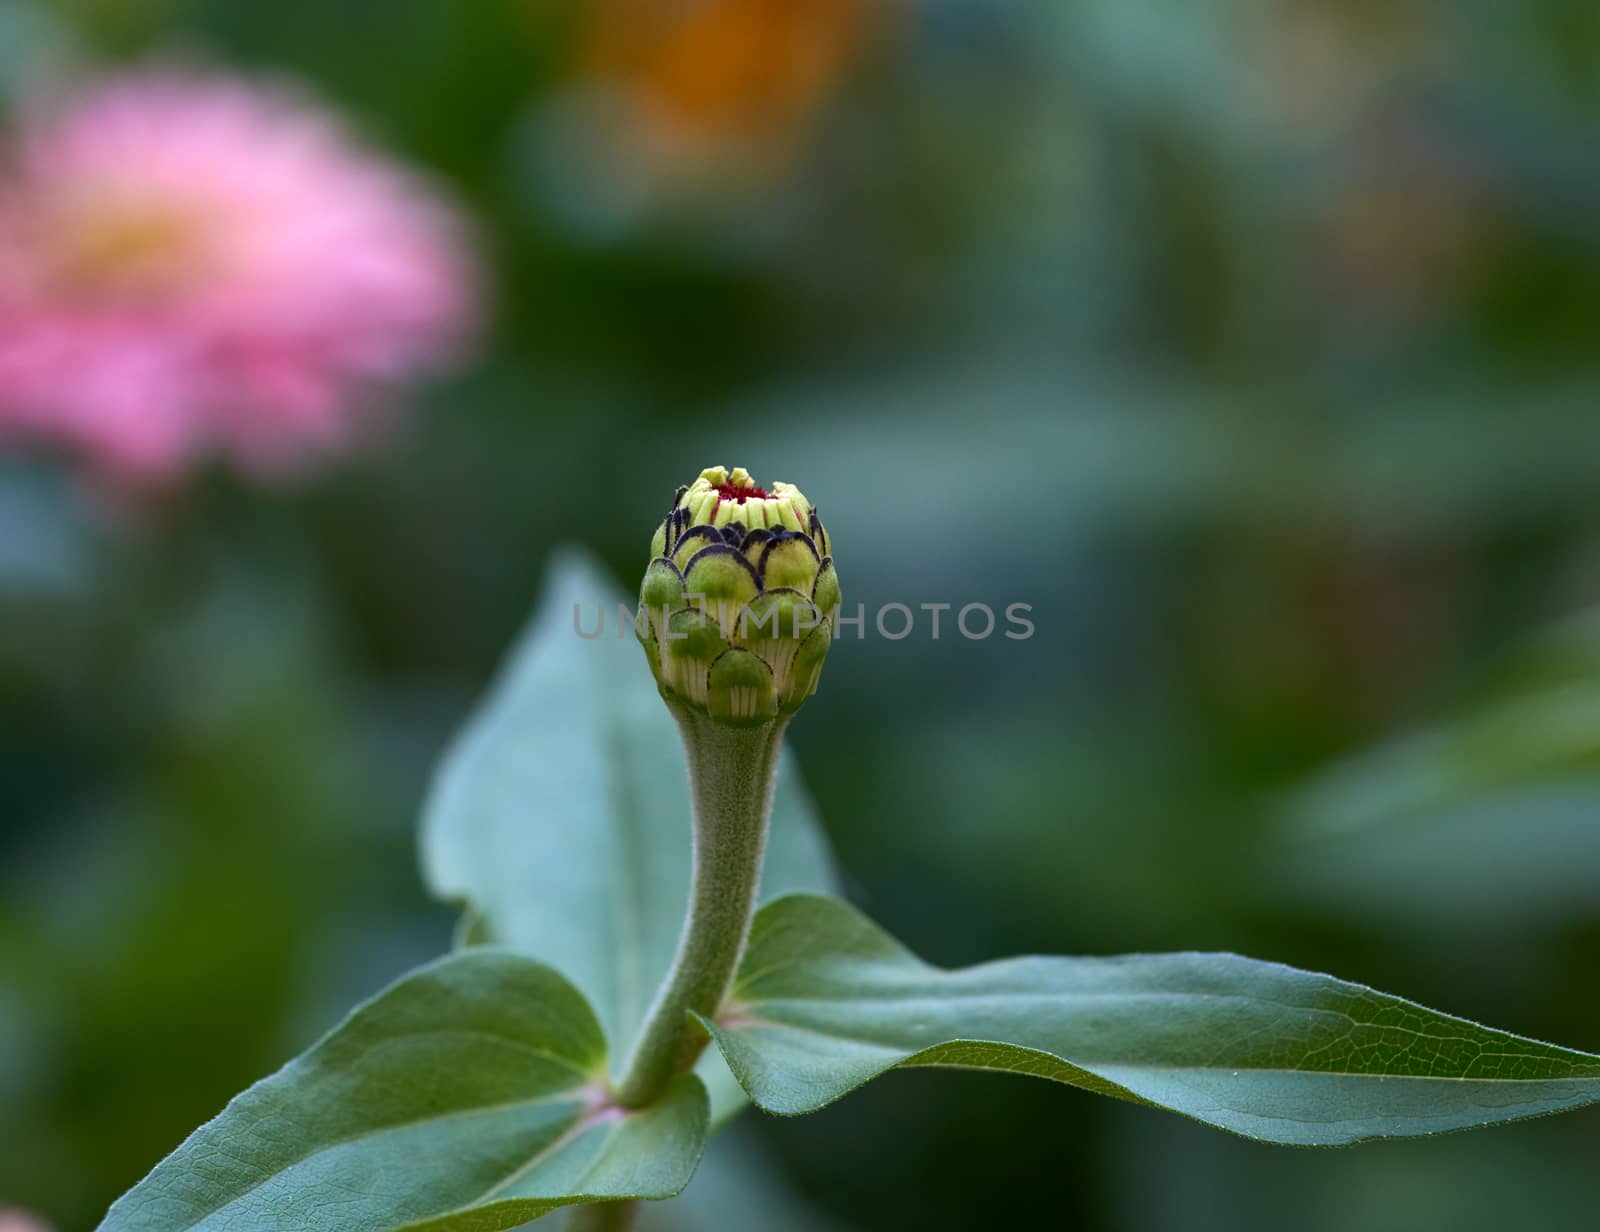 zinnia flower stalk with green leaves and unblown bud by ndanko